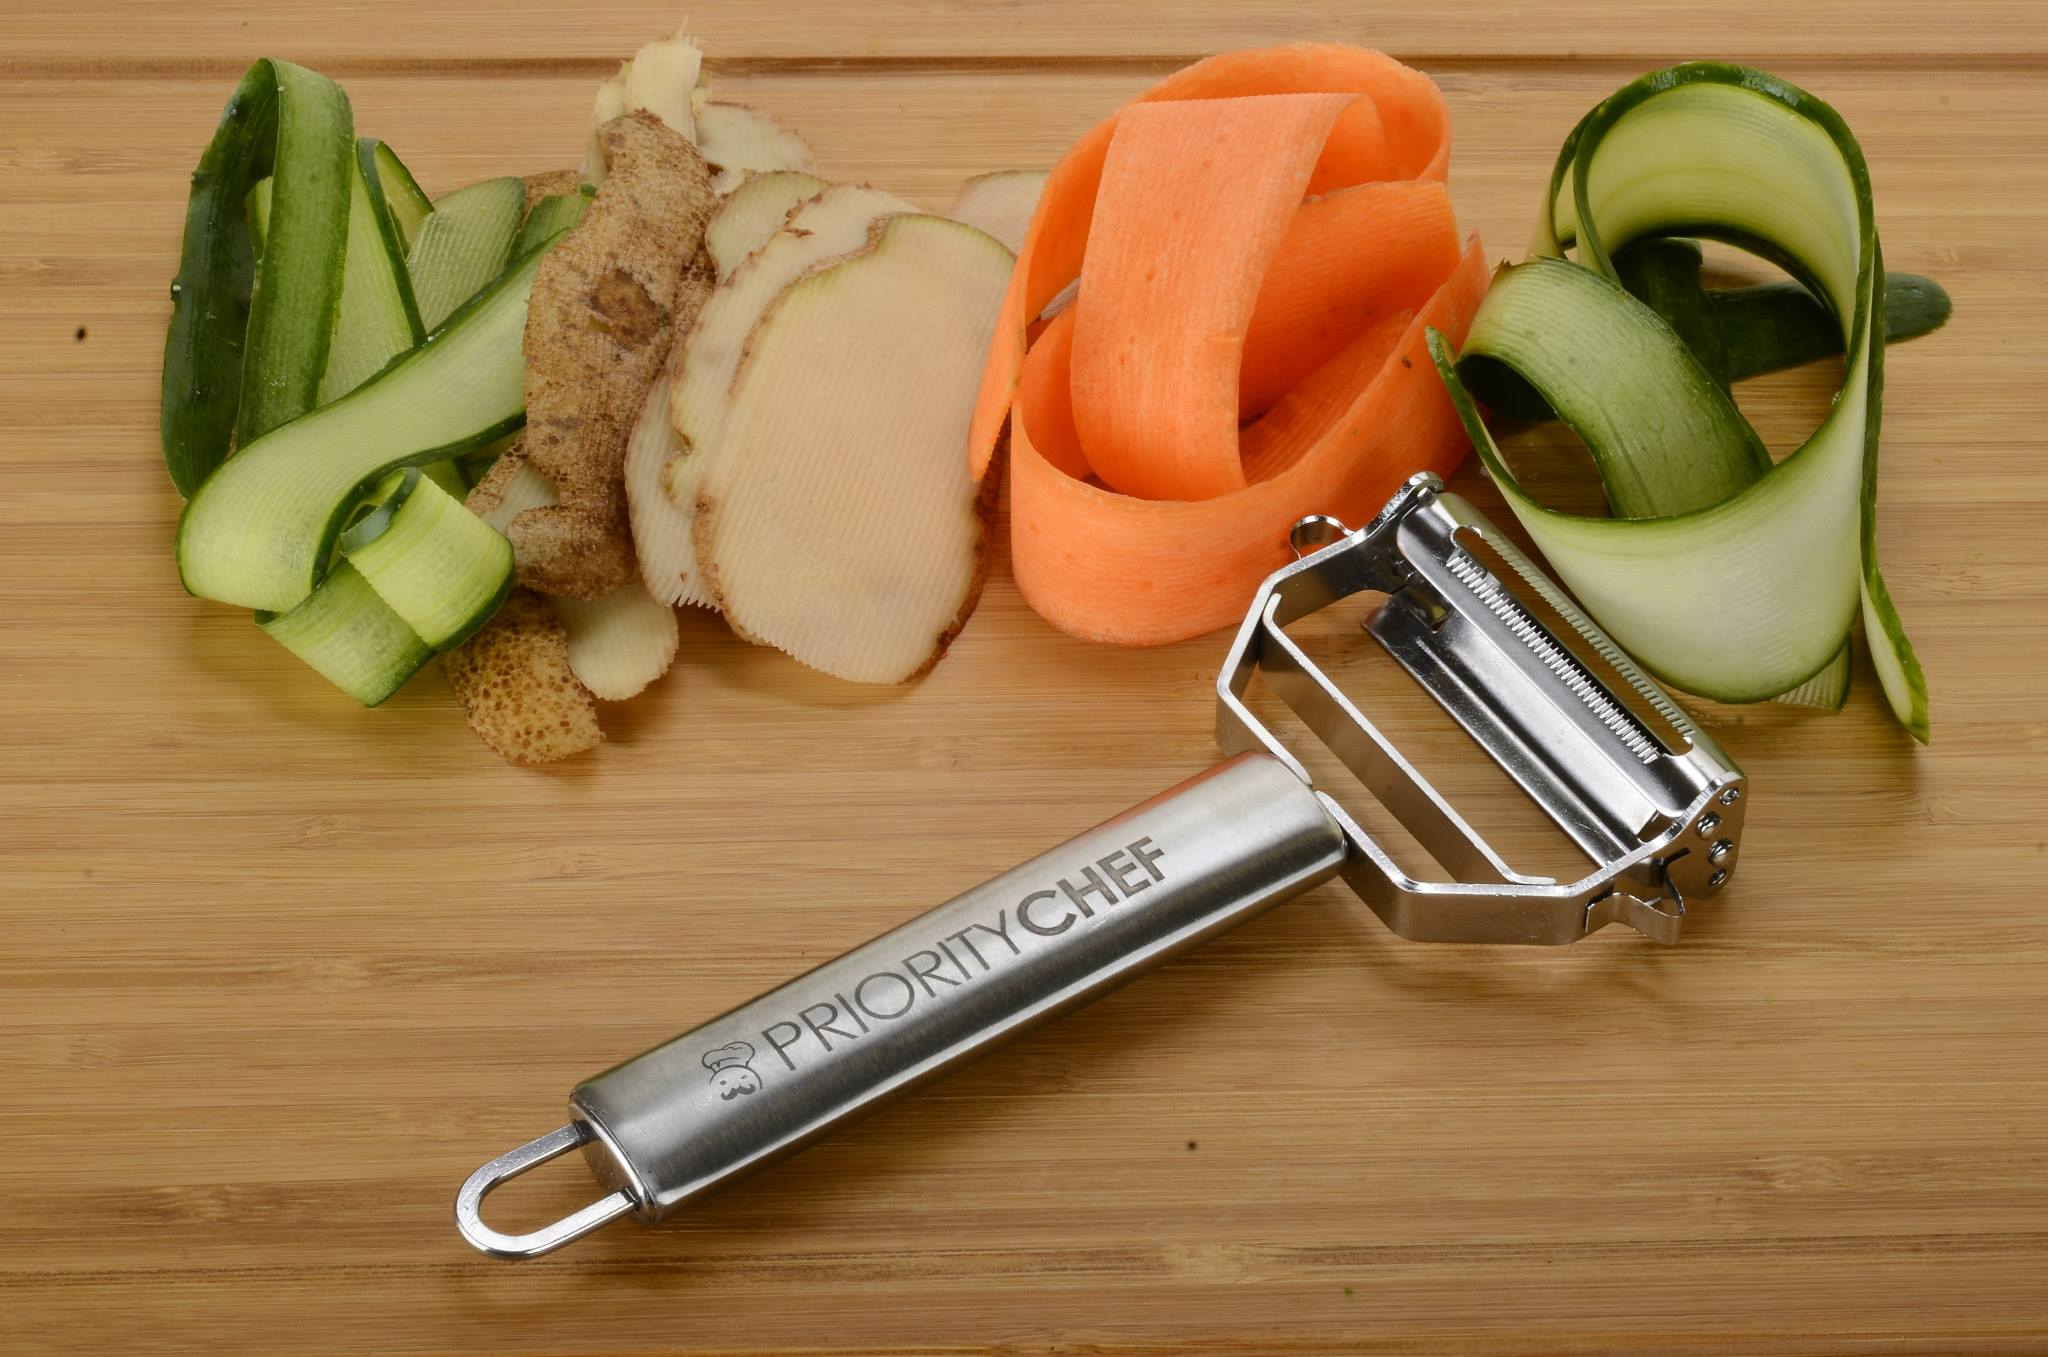 Priority Dual Julienne and Vegetable Peeler #Review - Living Chic Mom